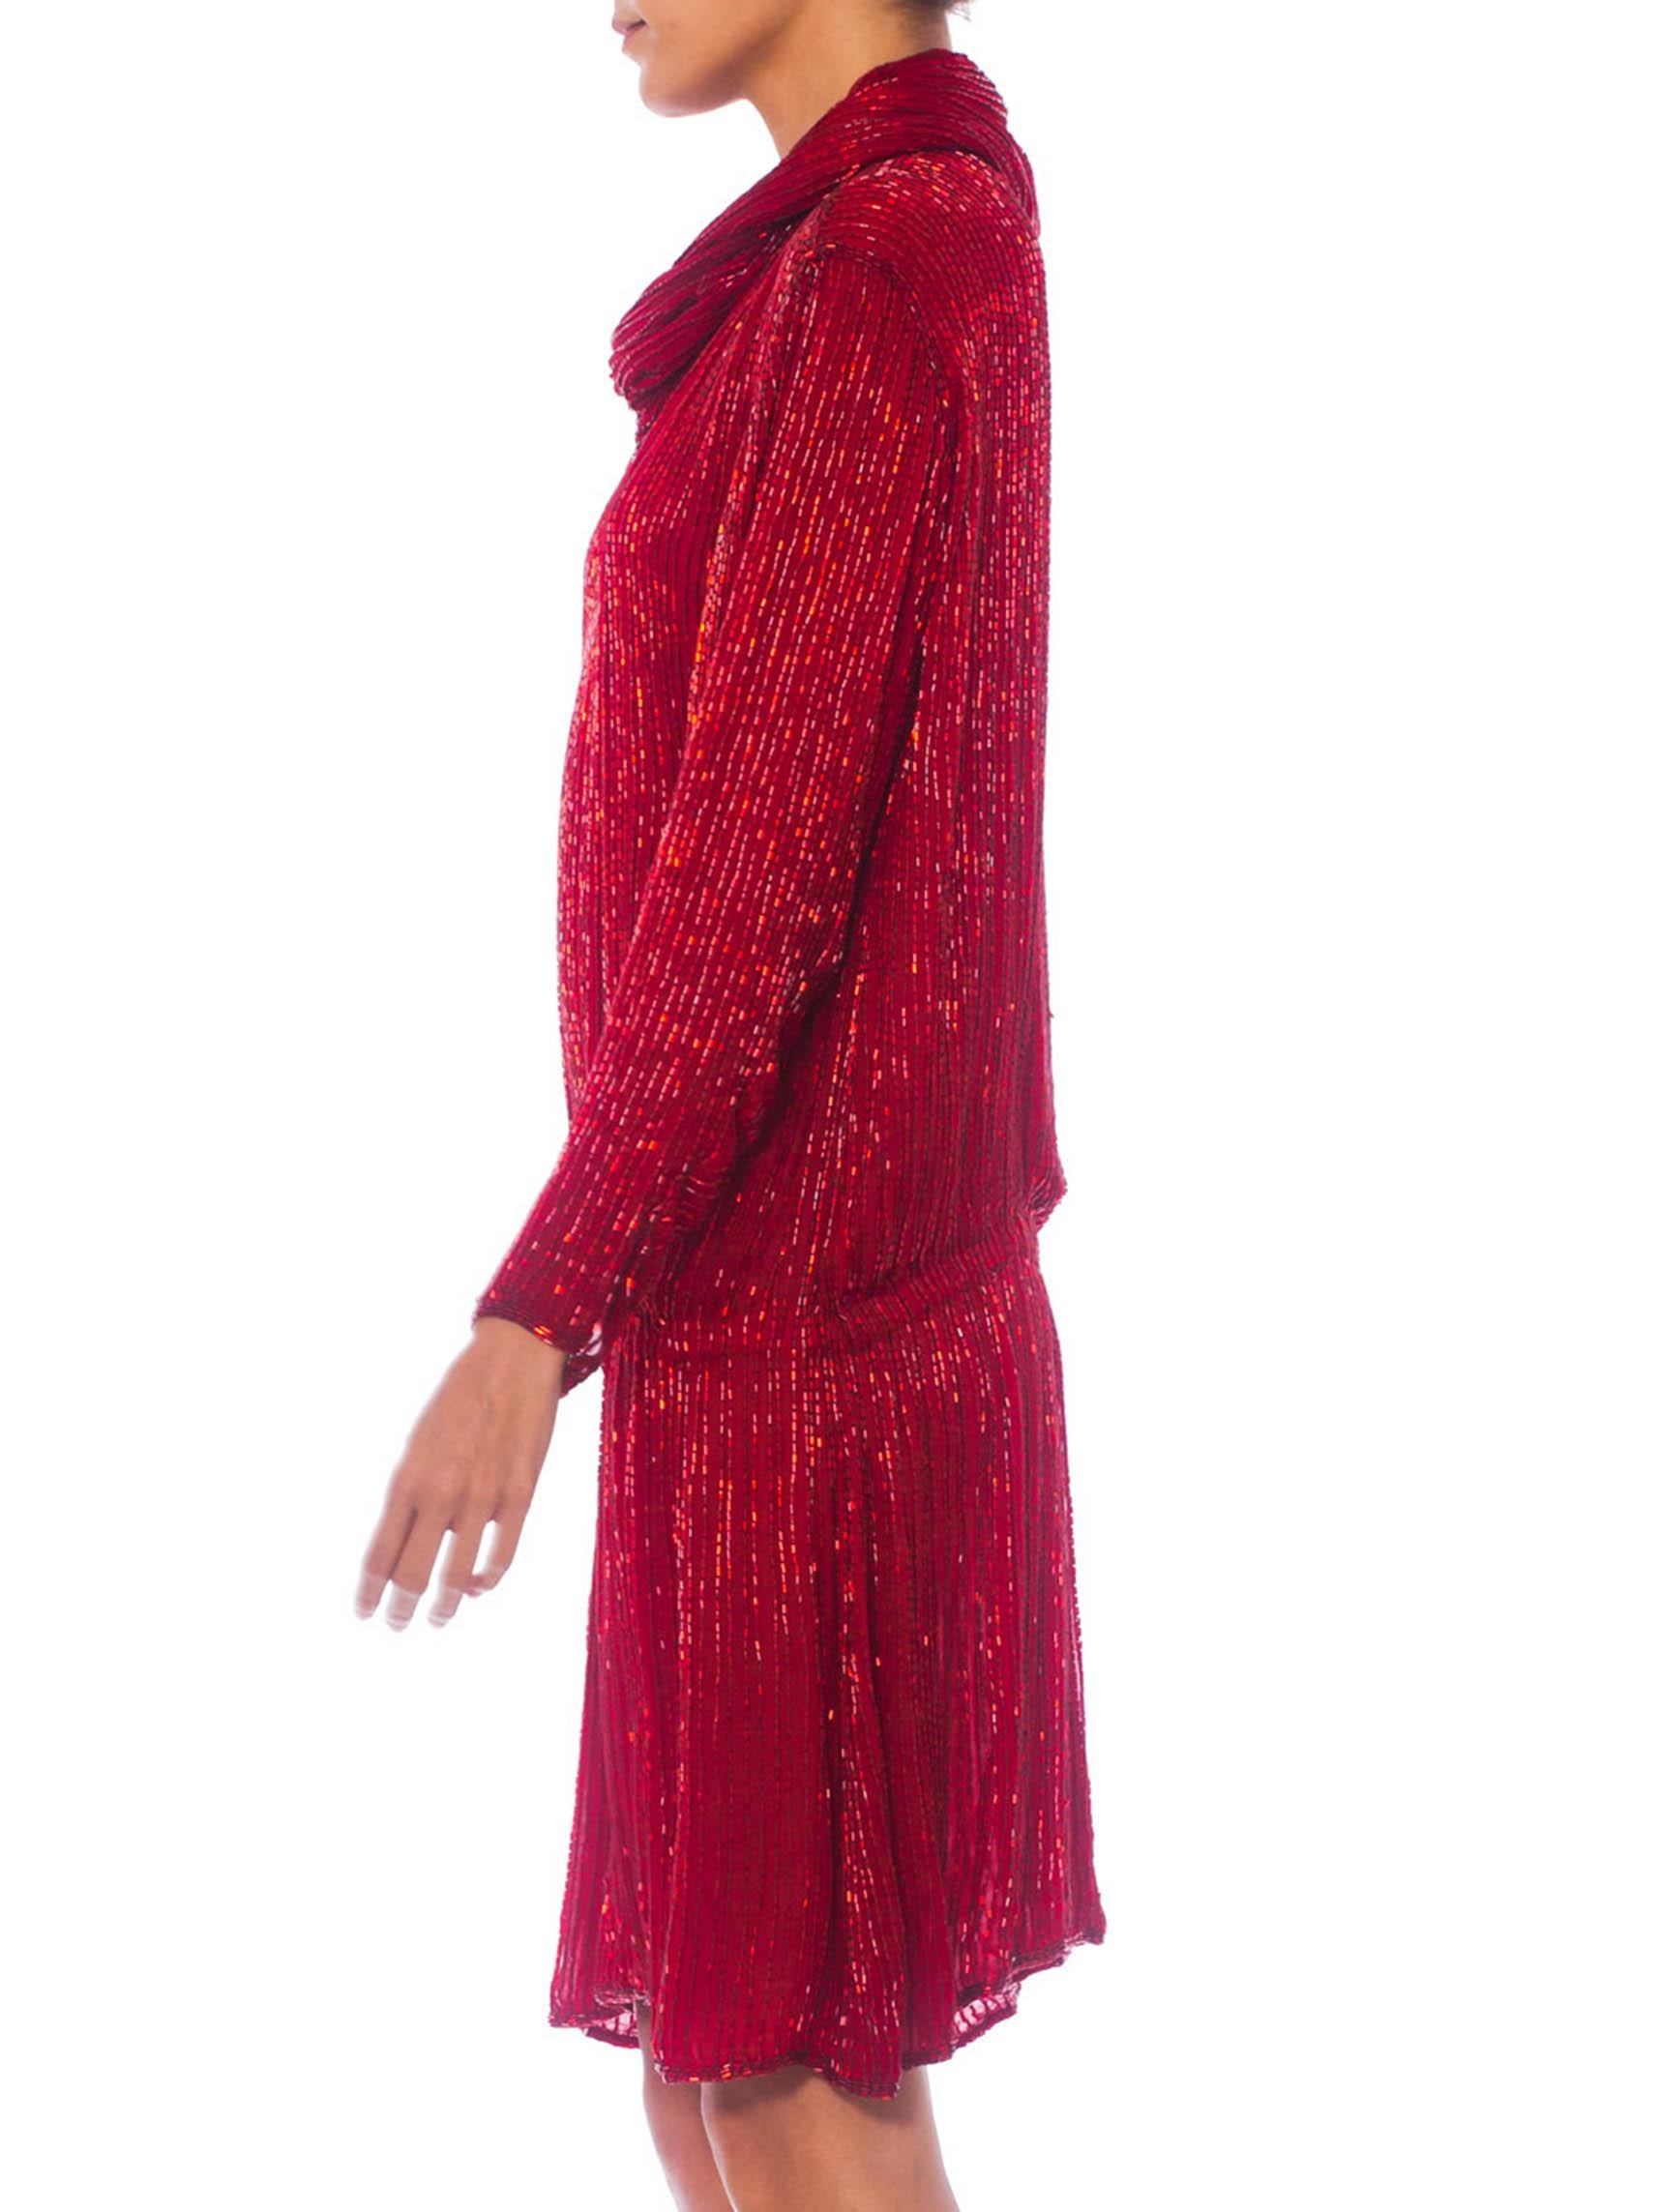 Women's 1970S HALSTON Red Silk Chiffon Oversized Mini Cocktail Dress Covered In Bugle B For Sale